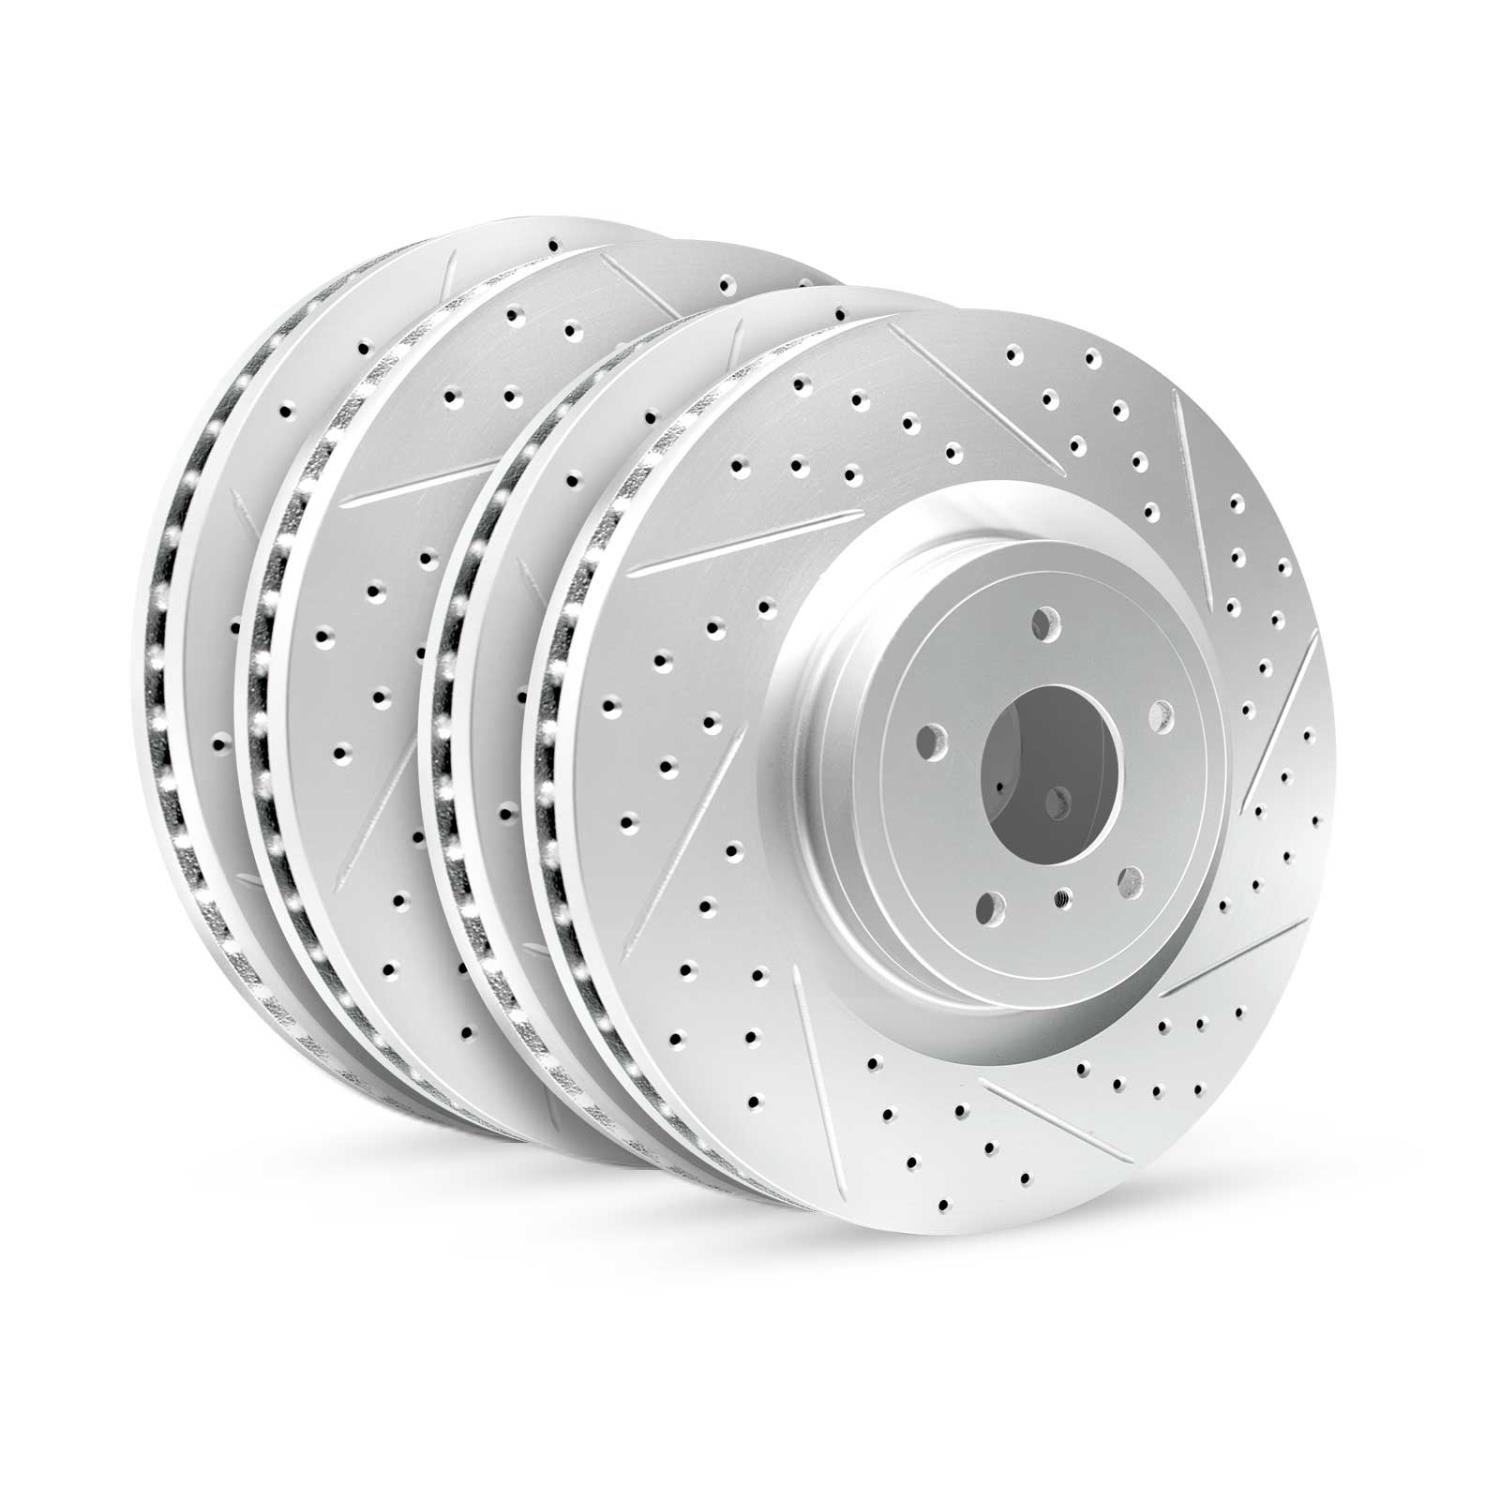 GEO-Carbon Drilled/Slotted Rotors, Fits Select Infiniti/Nissan, Position: Front/Rear